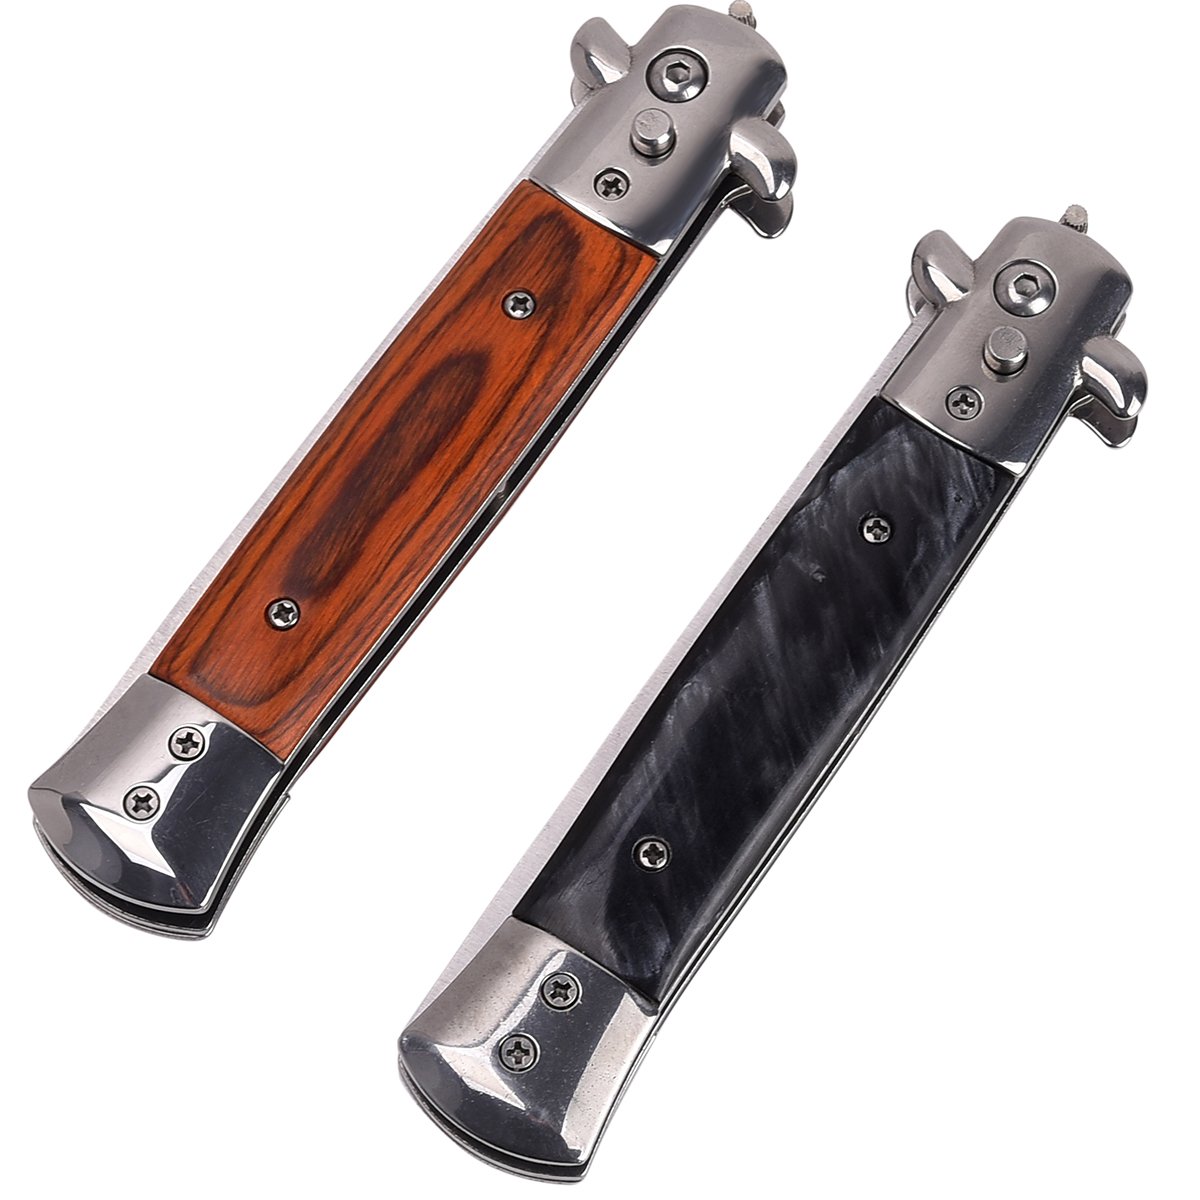 2 Pieces Wood Grain Switchblade Blade Comb Pocket Knife Hair Brush